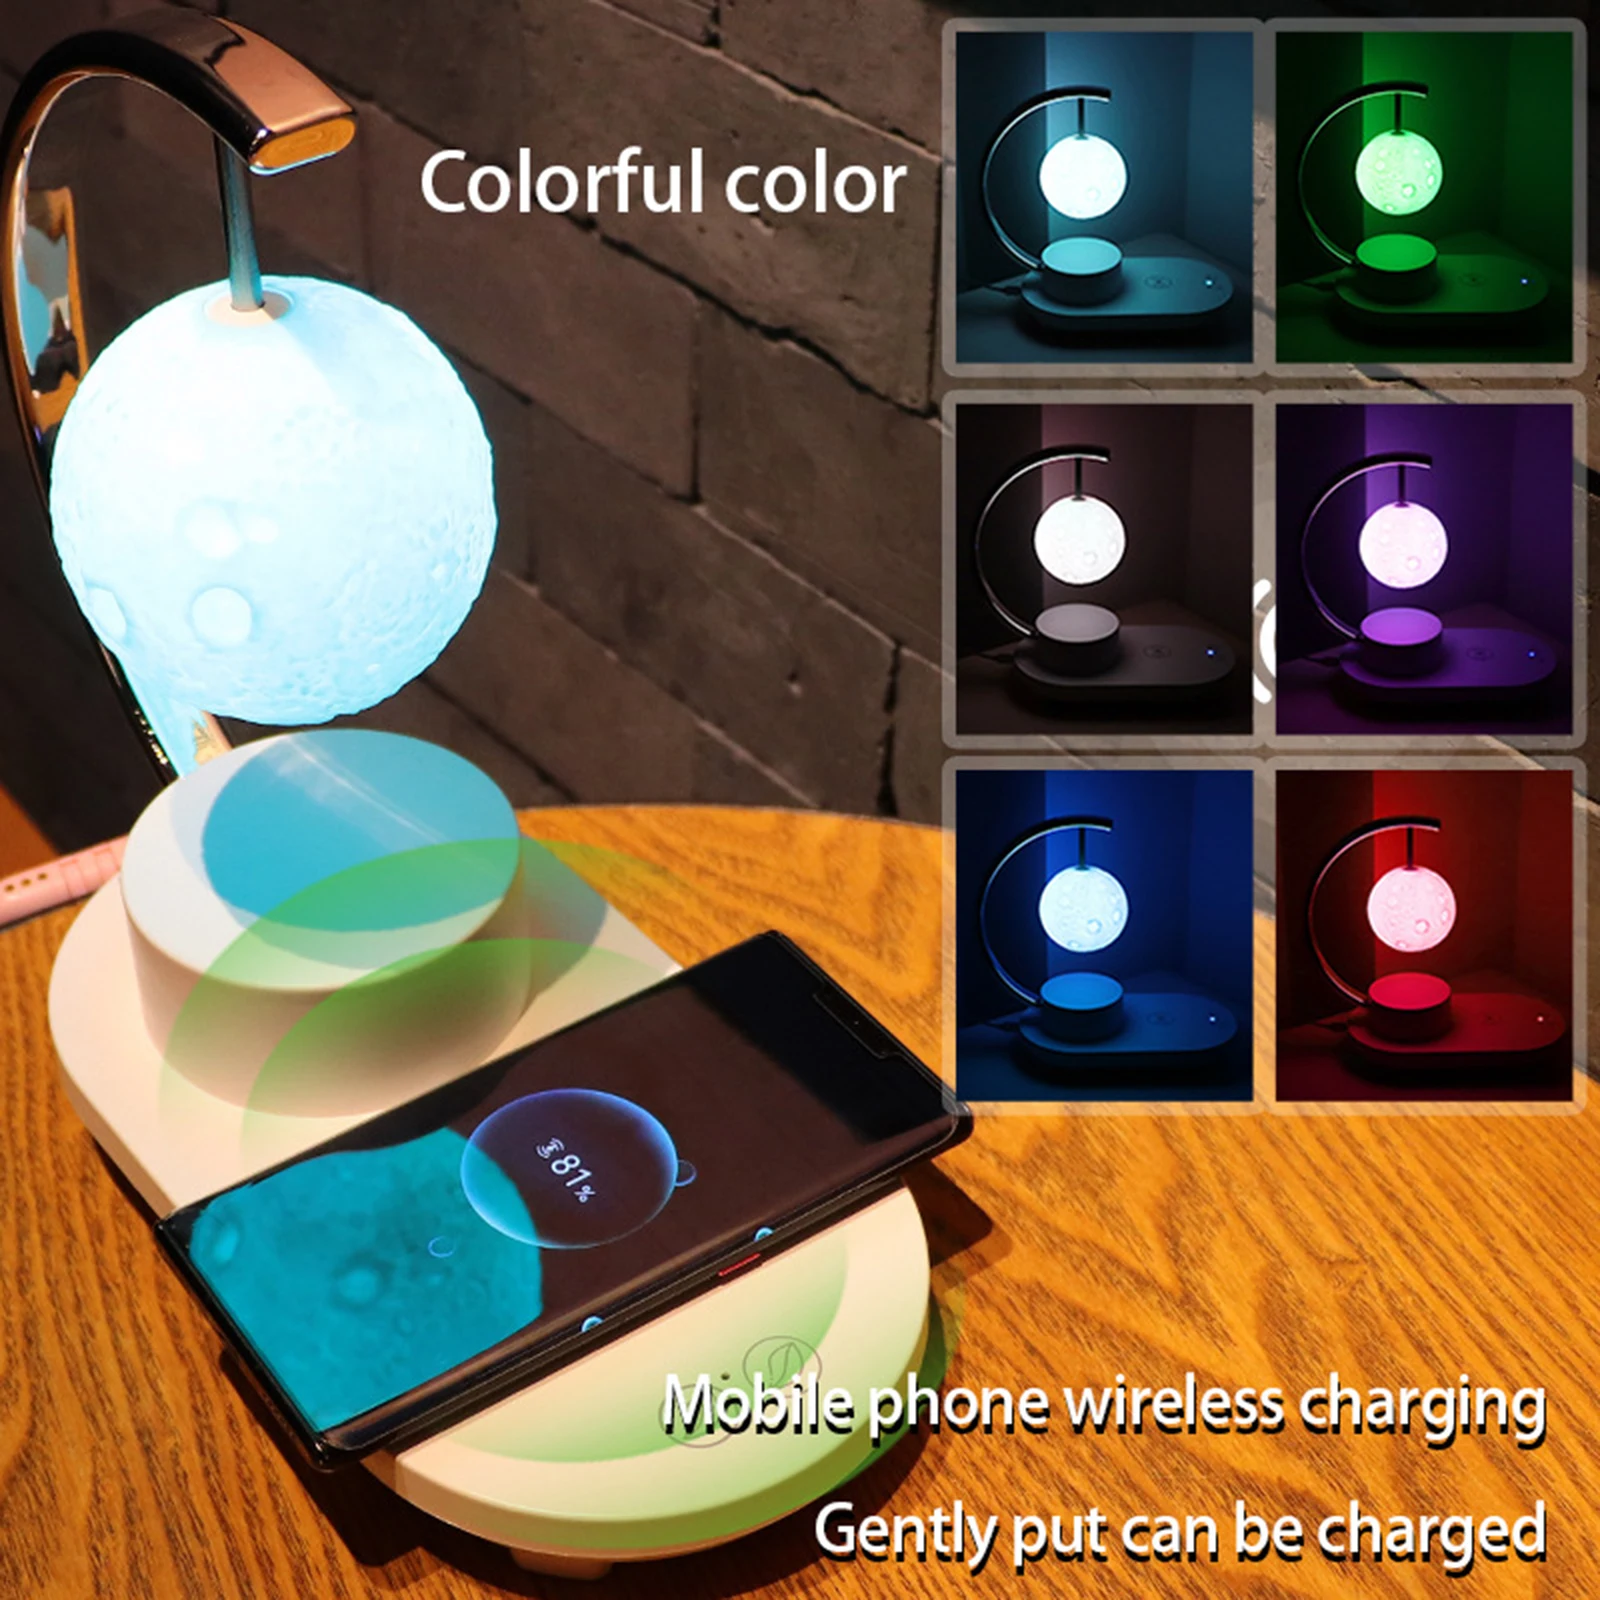 multifunctional-3-in-1-led-colorful-ambient-night-light-creative-bluetooth-speaker-cell-phone-wireless-charging-for-bedroom